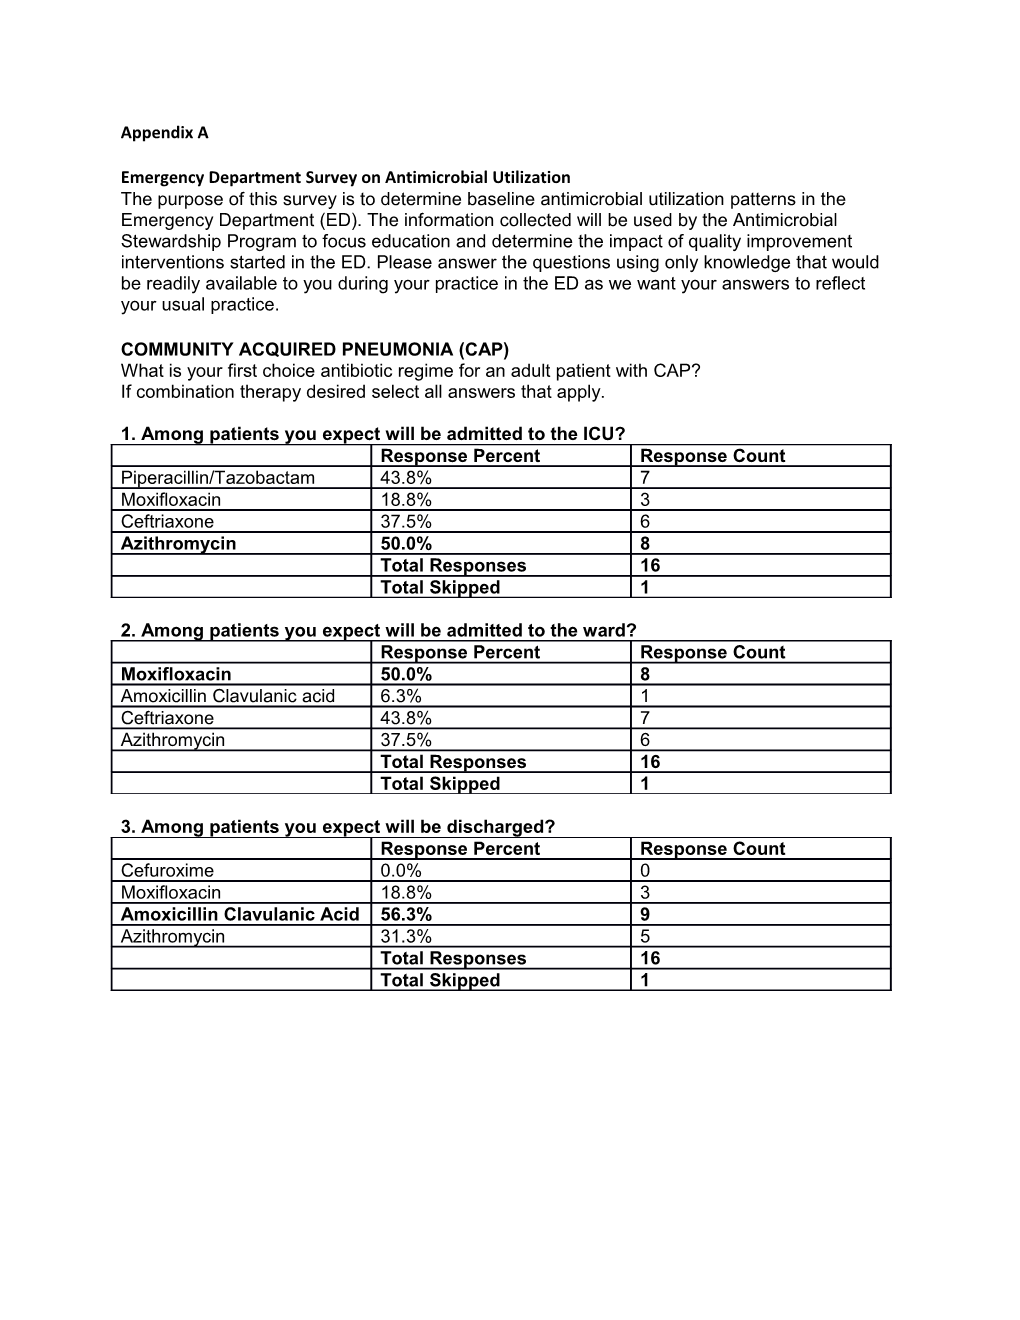 Emergency Department Survey on Antimicrobial Utilization